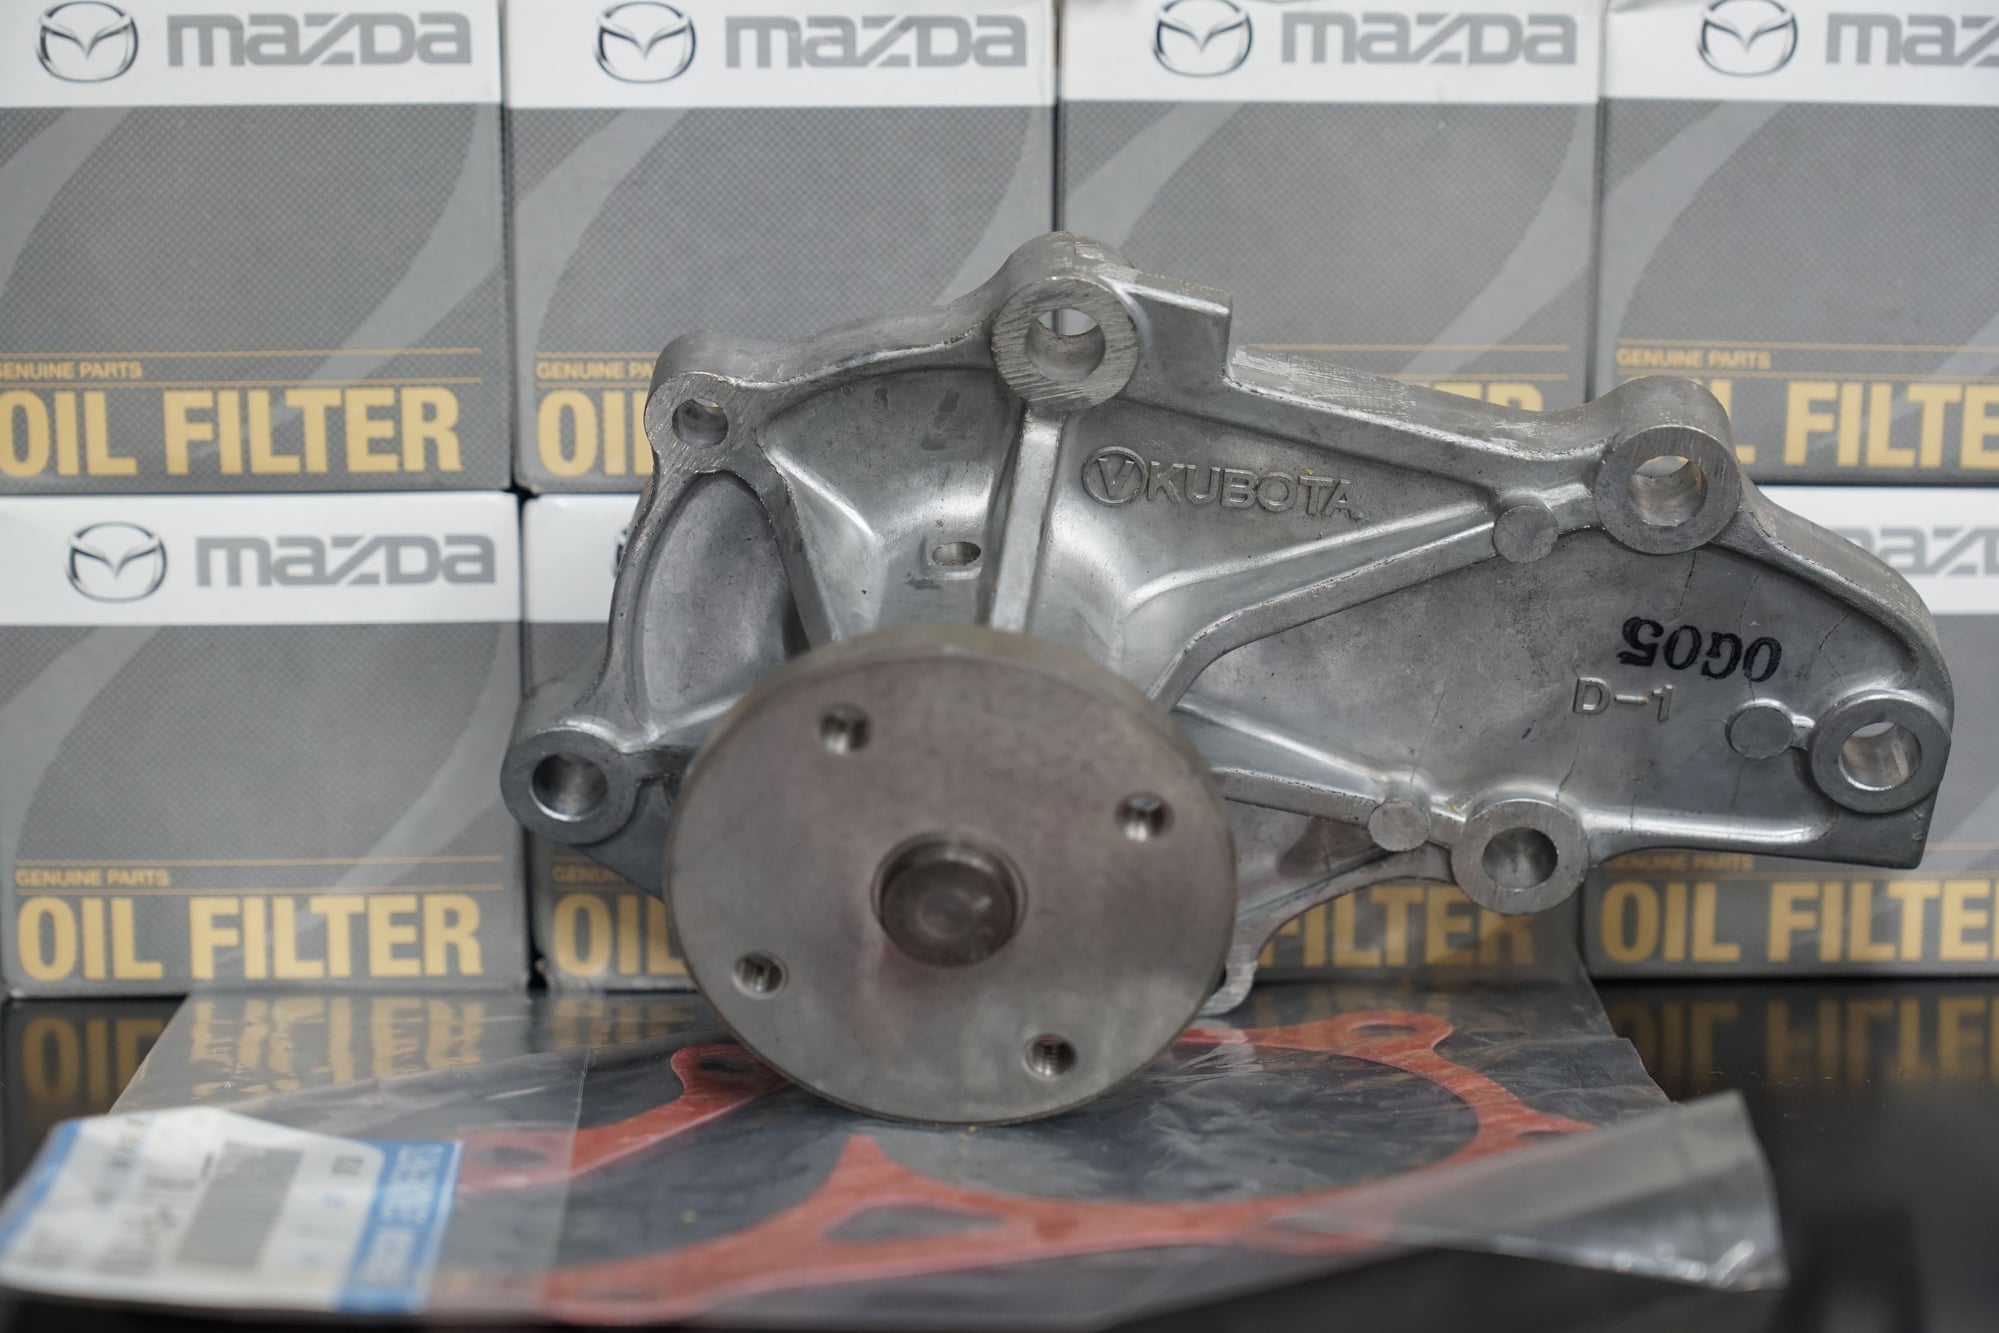 Accessories - BNIB RE-medy High Flow Water Pump - New - 1993 to 2002 Mazda RX-7 - Chicago, IL 60605, United States